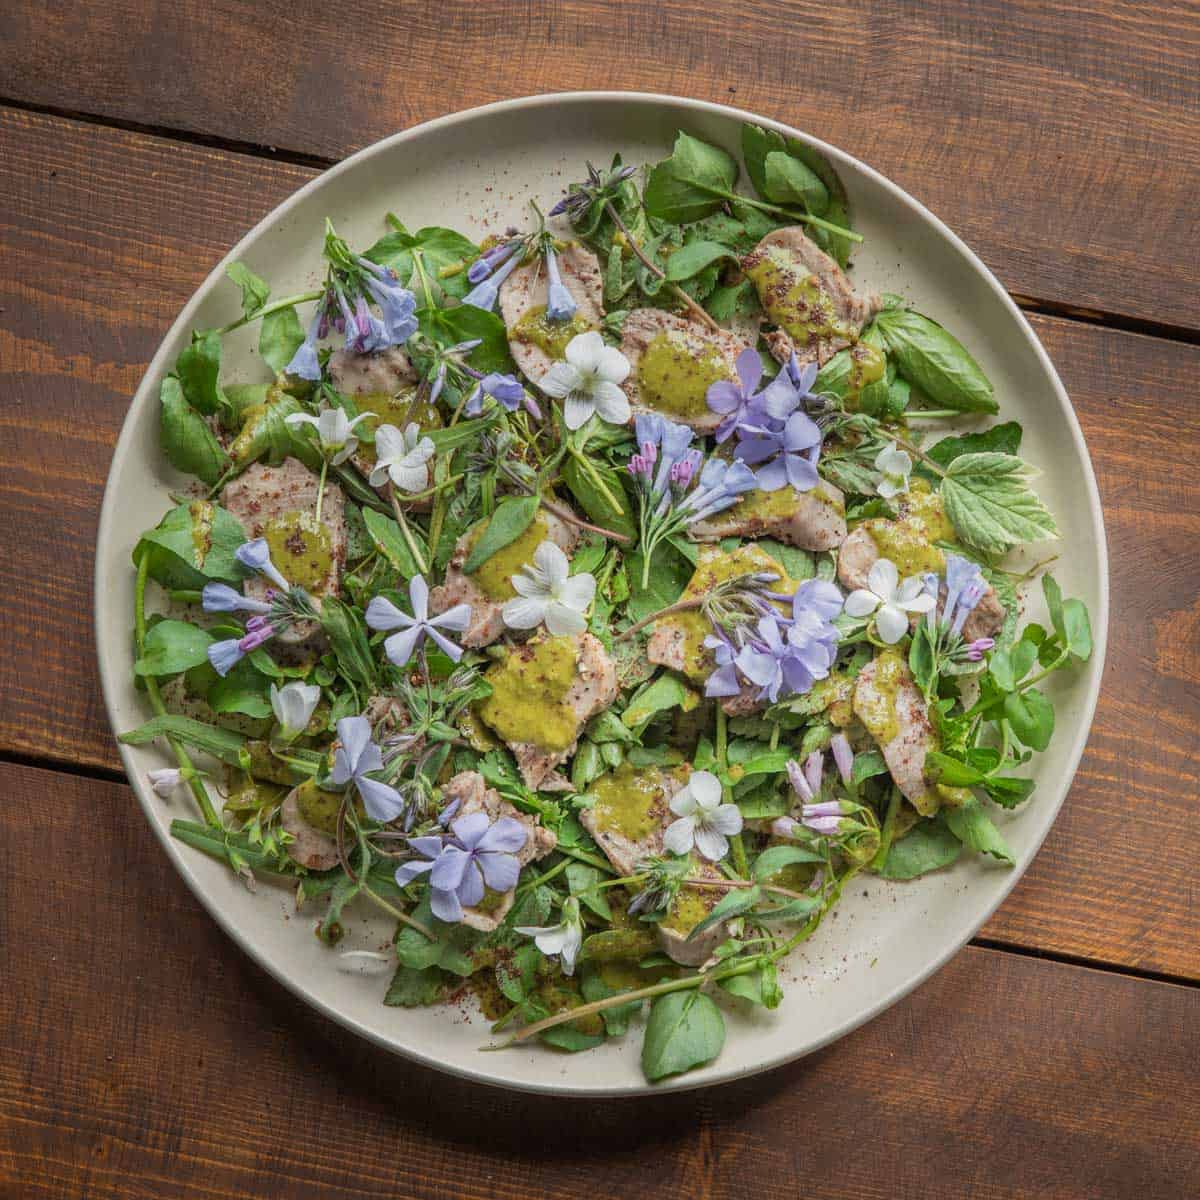 A salad of watercress and spring vegetables with cooked tongue and purple and white wild flowers.